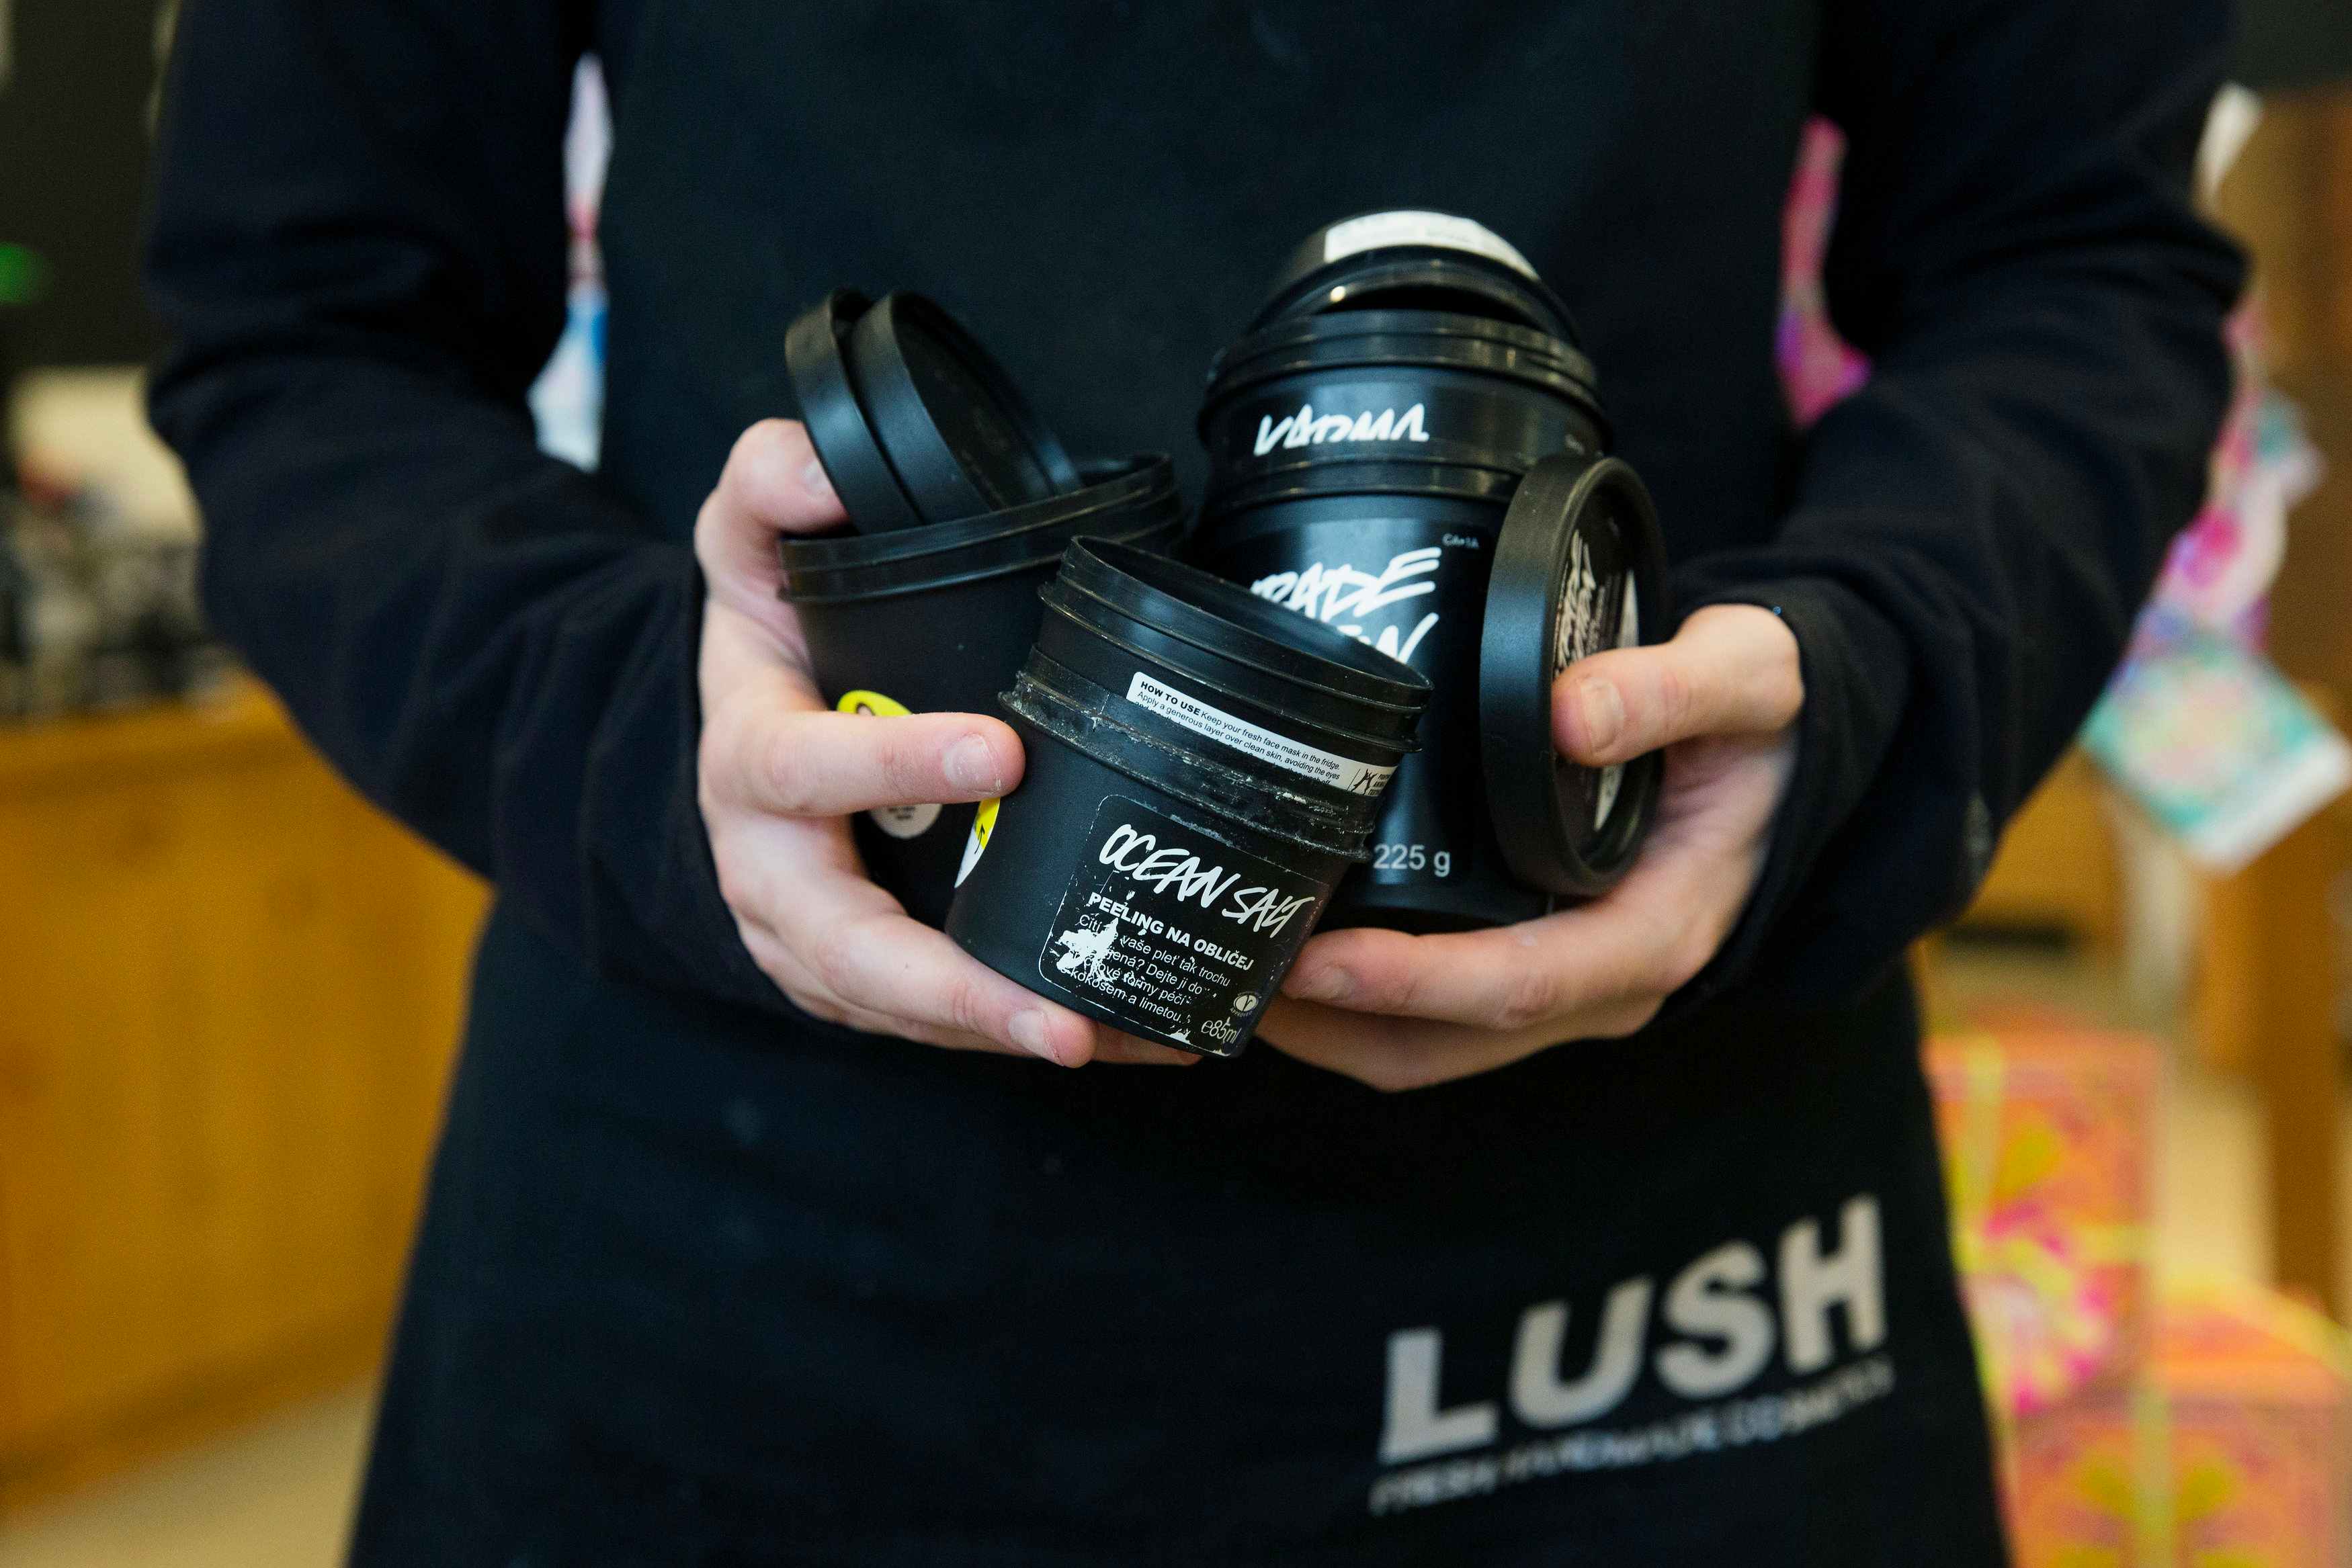 a lush employee holding a bunch of empty containers     